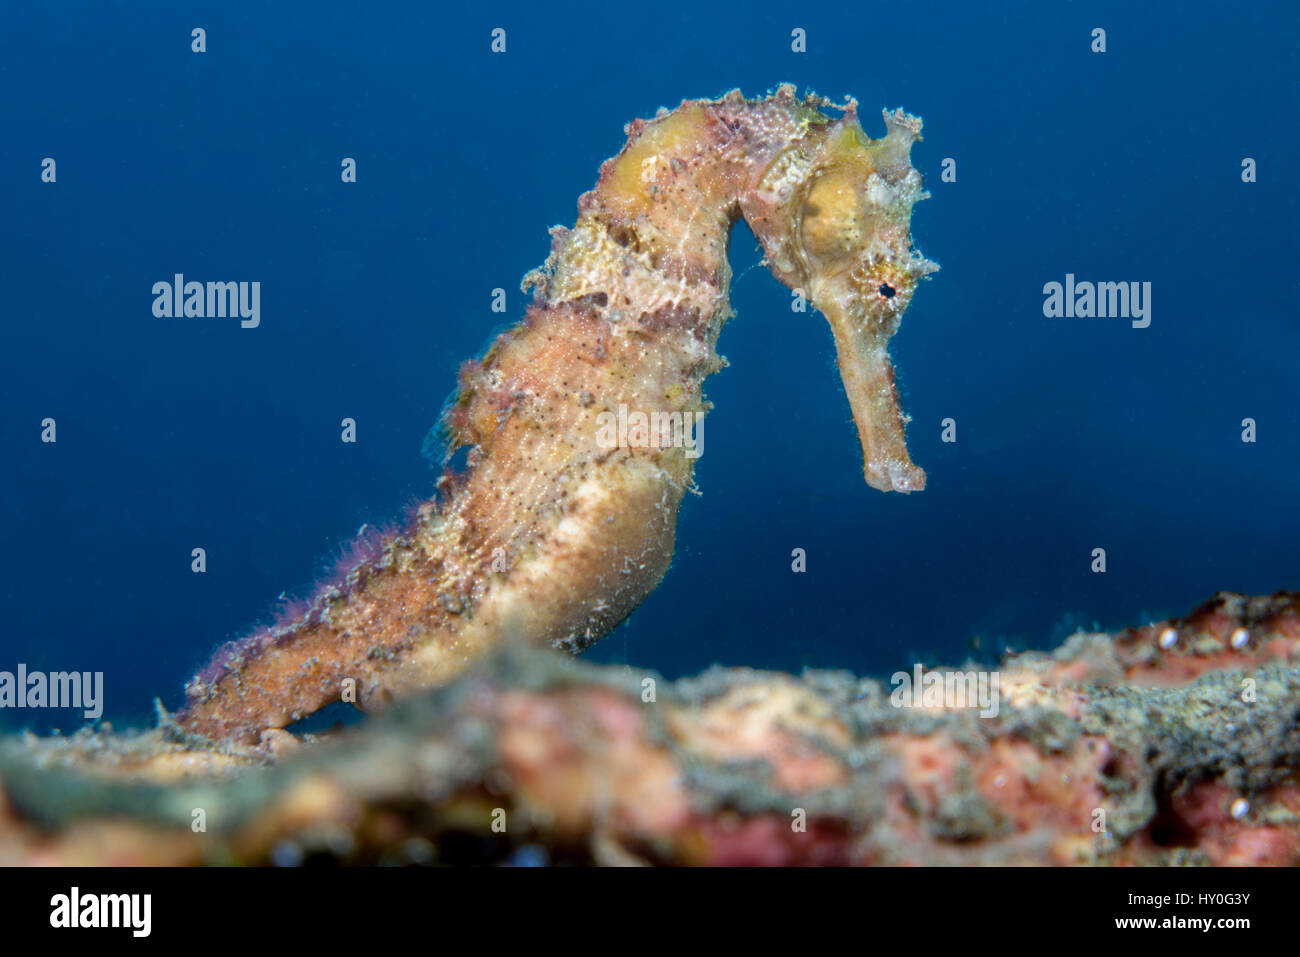 Seahorse with blue background in the Lembeh Strait / Sulawesi / Indonesia Stock Photo